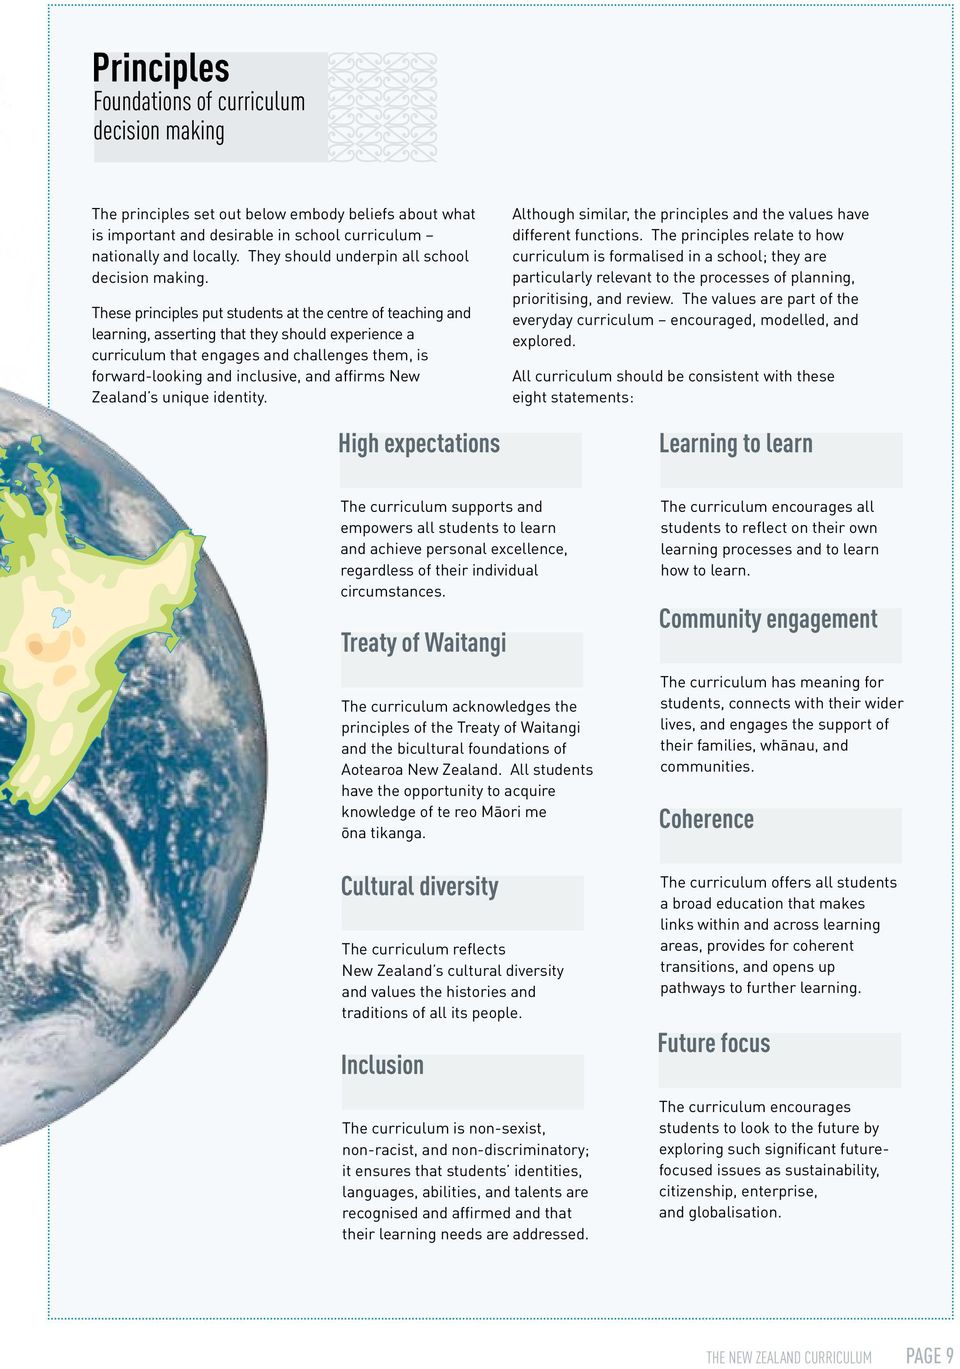 These principles put students at the centre of teaching and learning, asserting that they should experience a curriculum that engages and challenges them, is forward-looking and inclusive, and